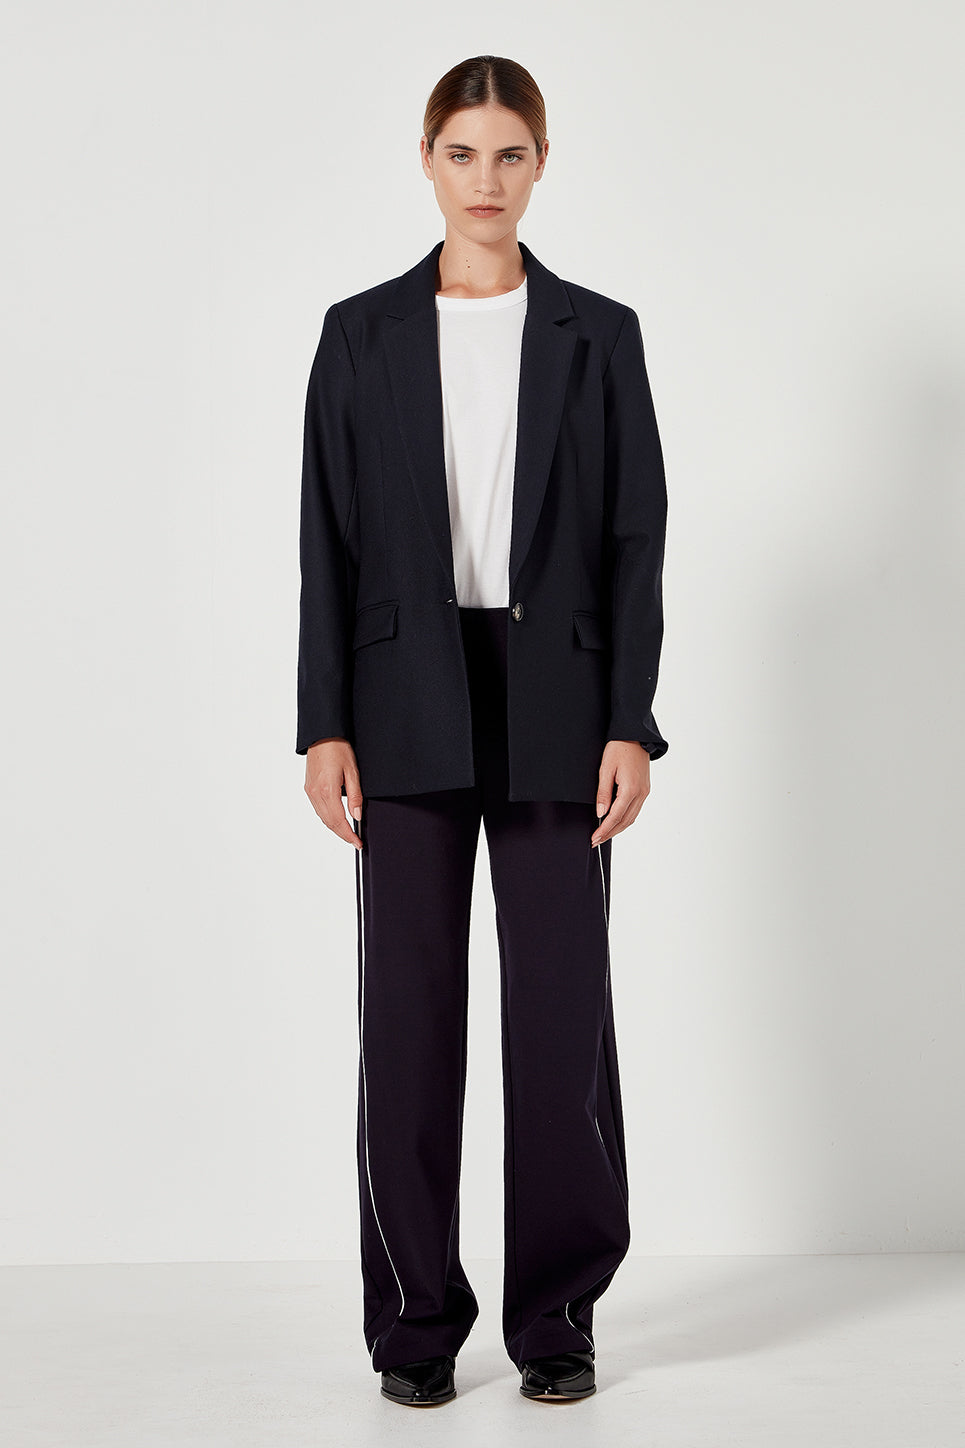 The Lennox Pant in Navy